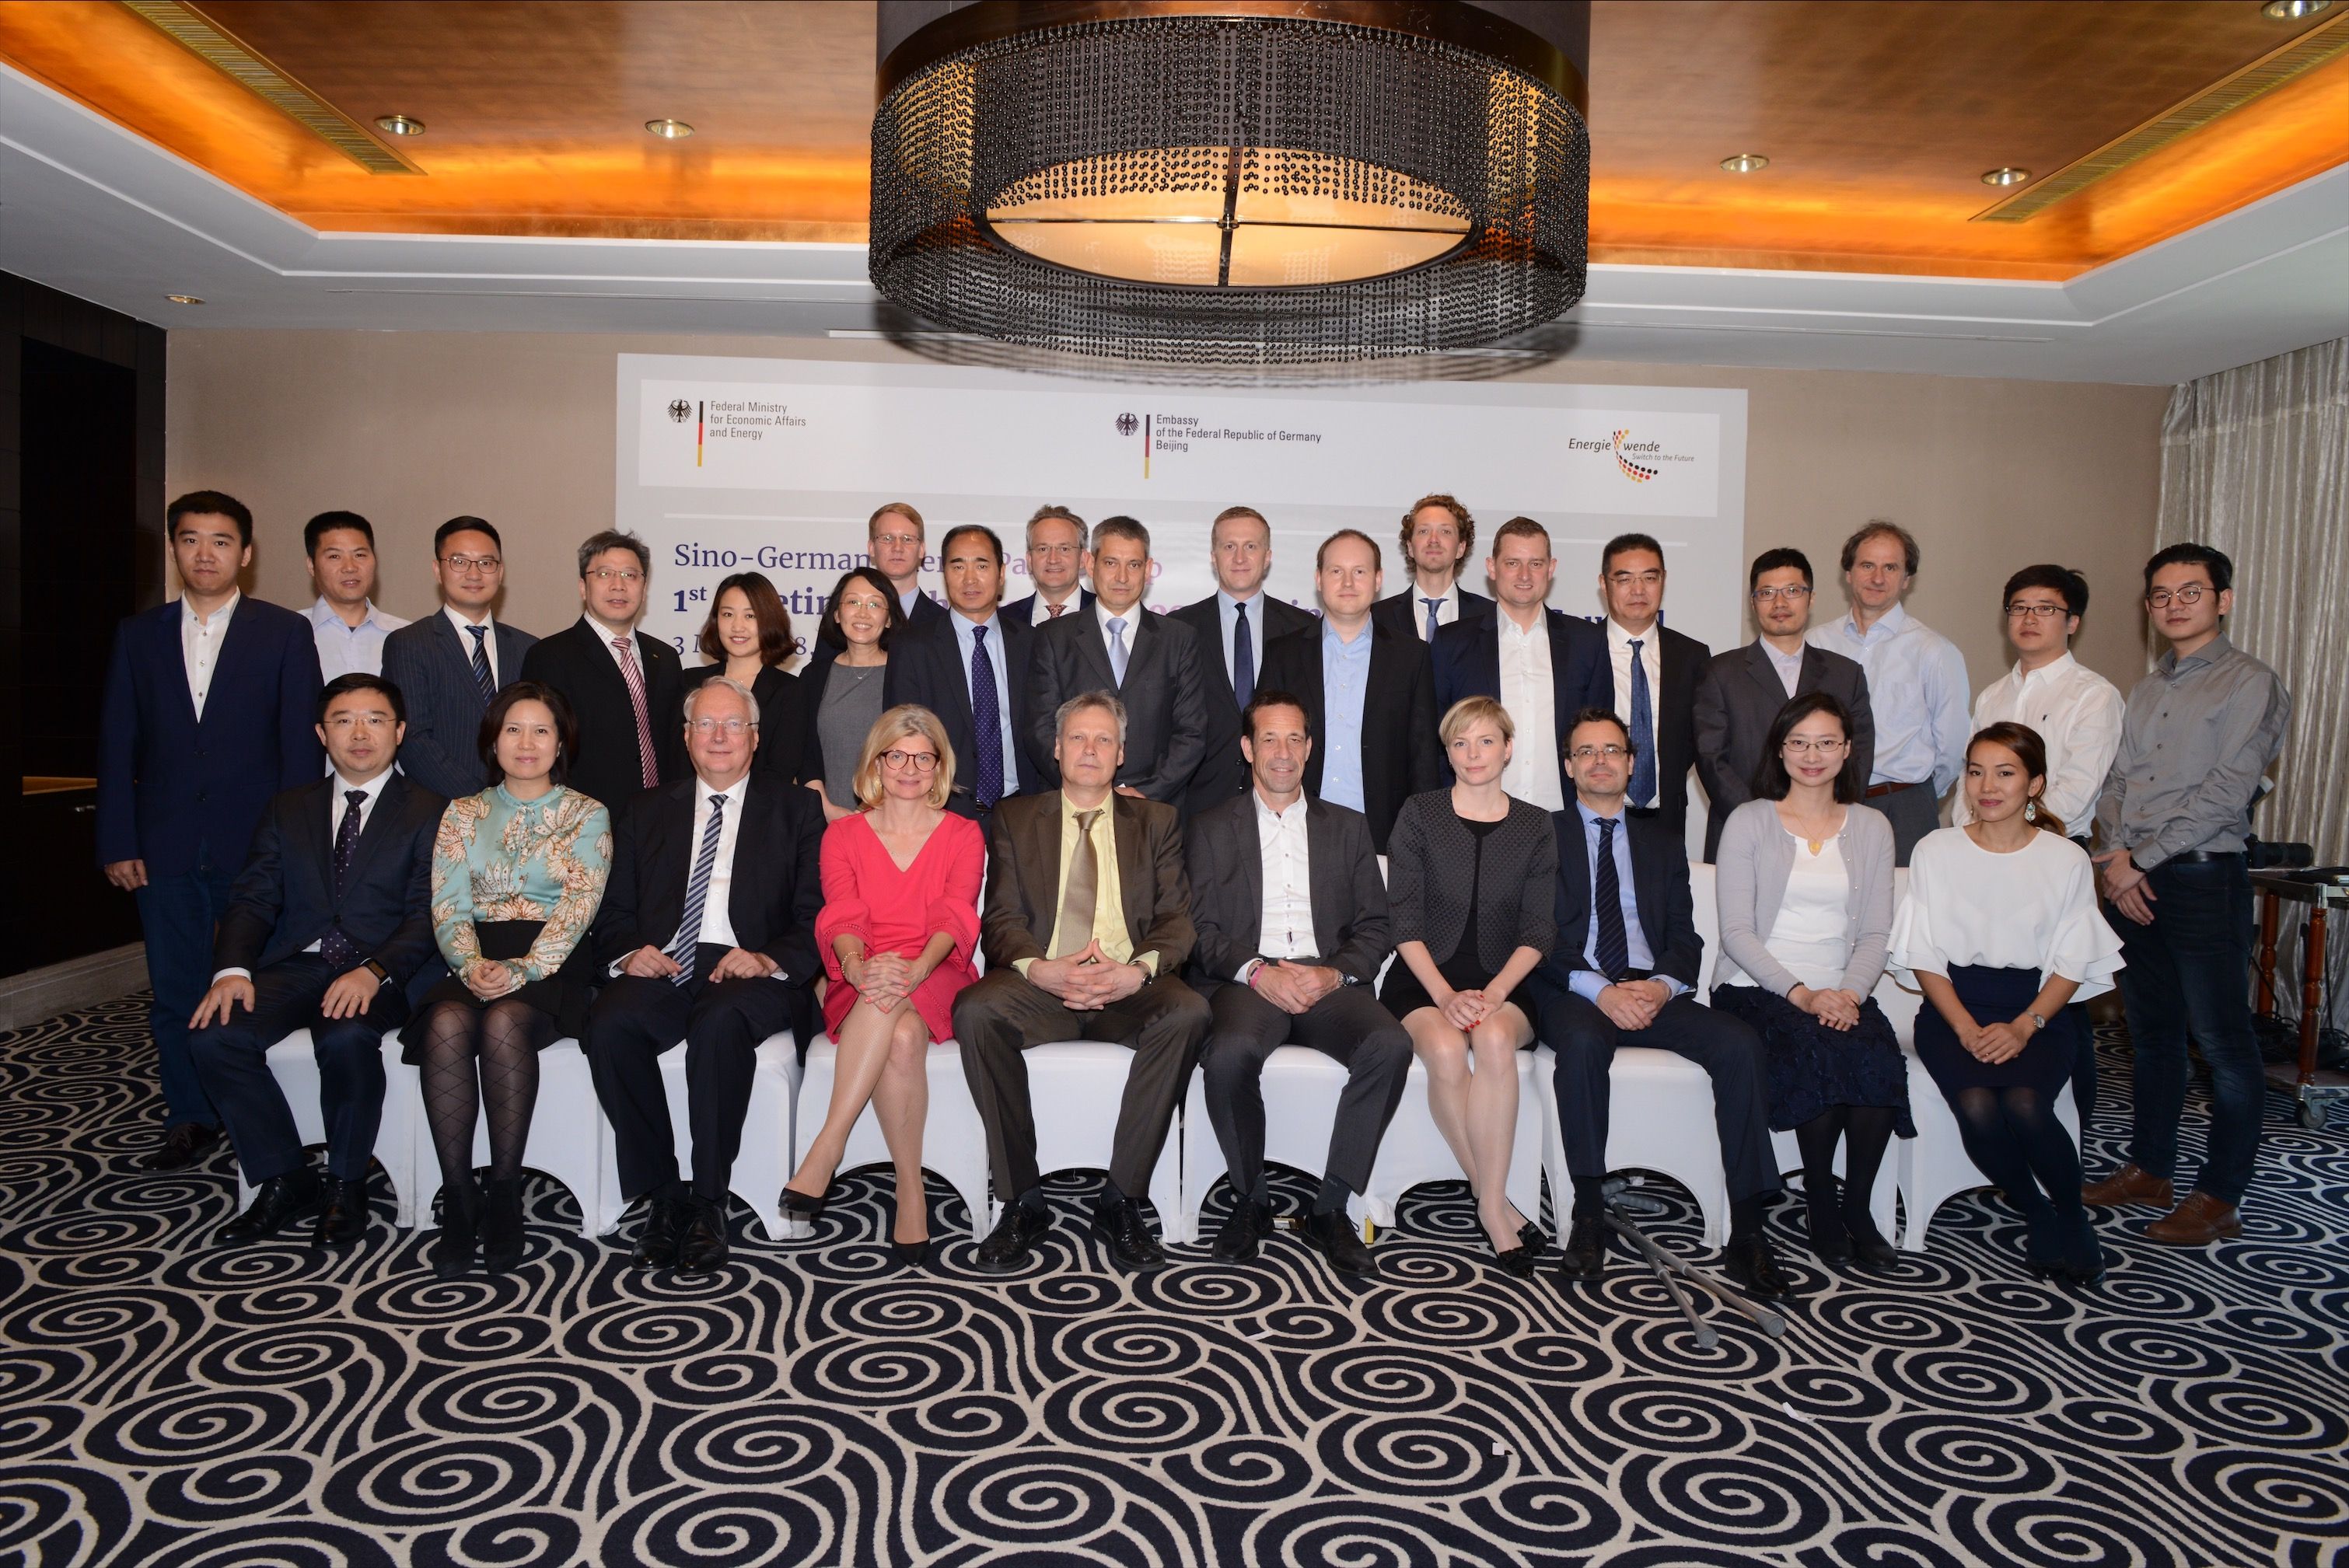 Group photo of the "German Local Business Advisory Council" meeting